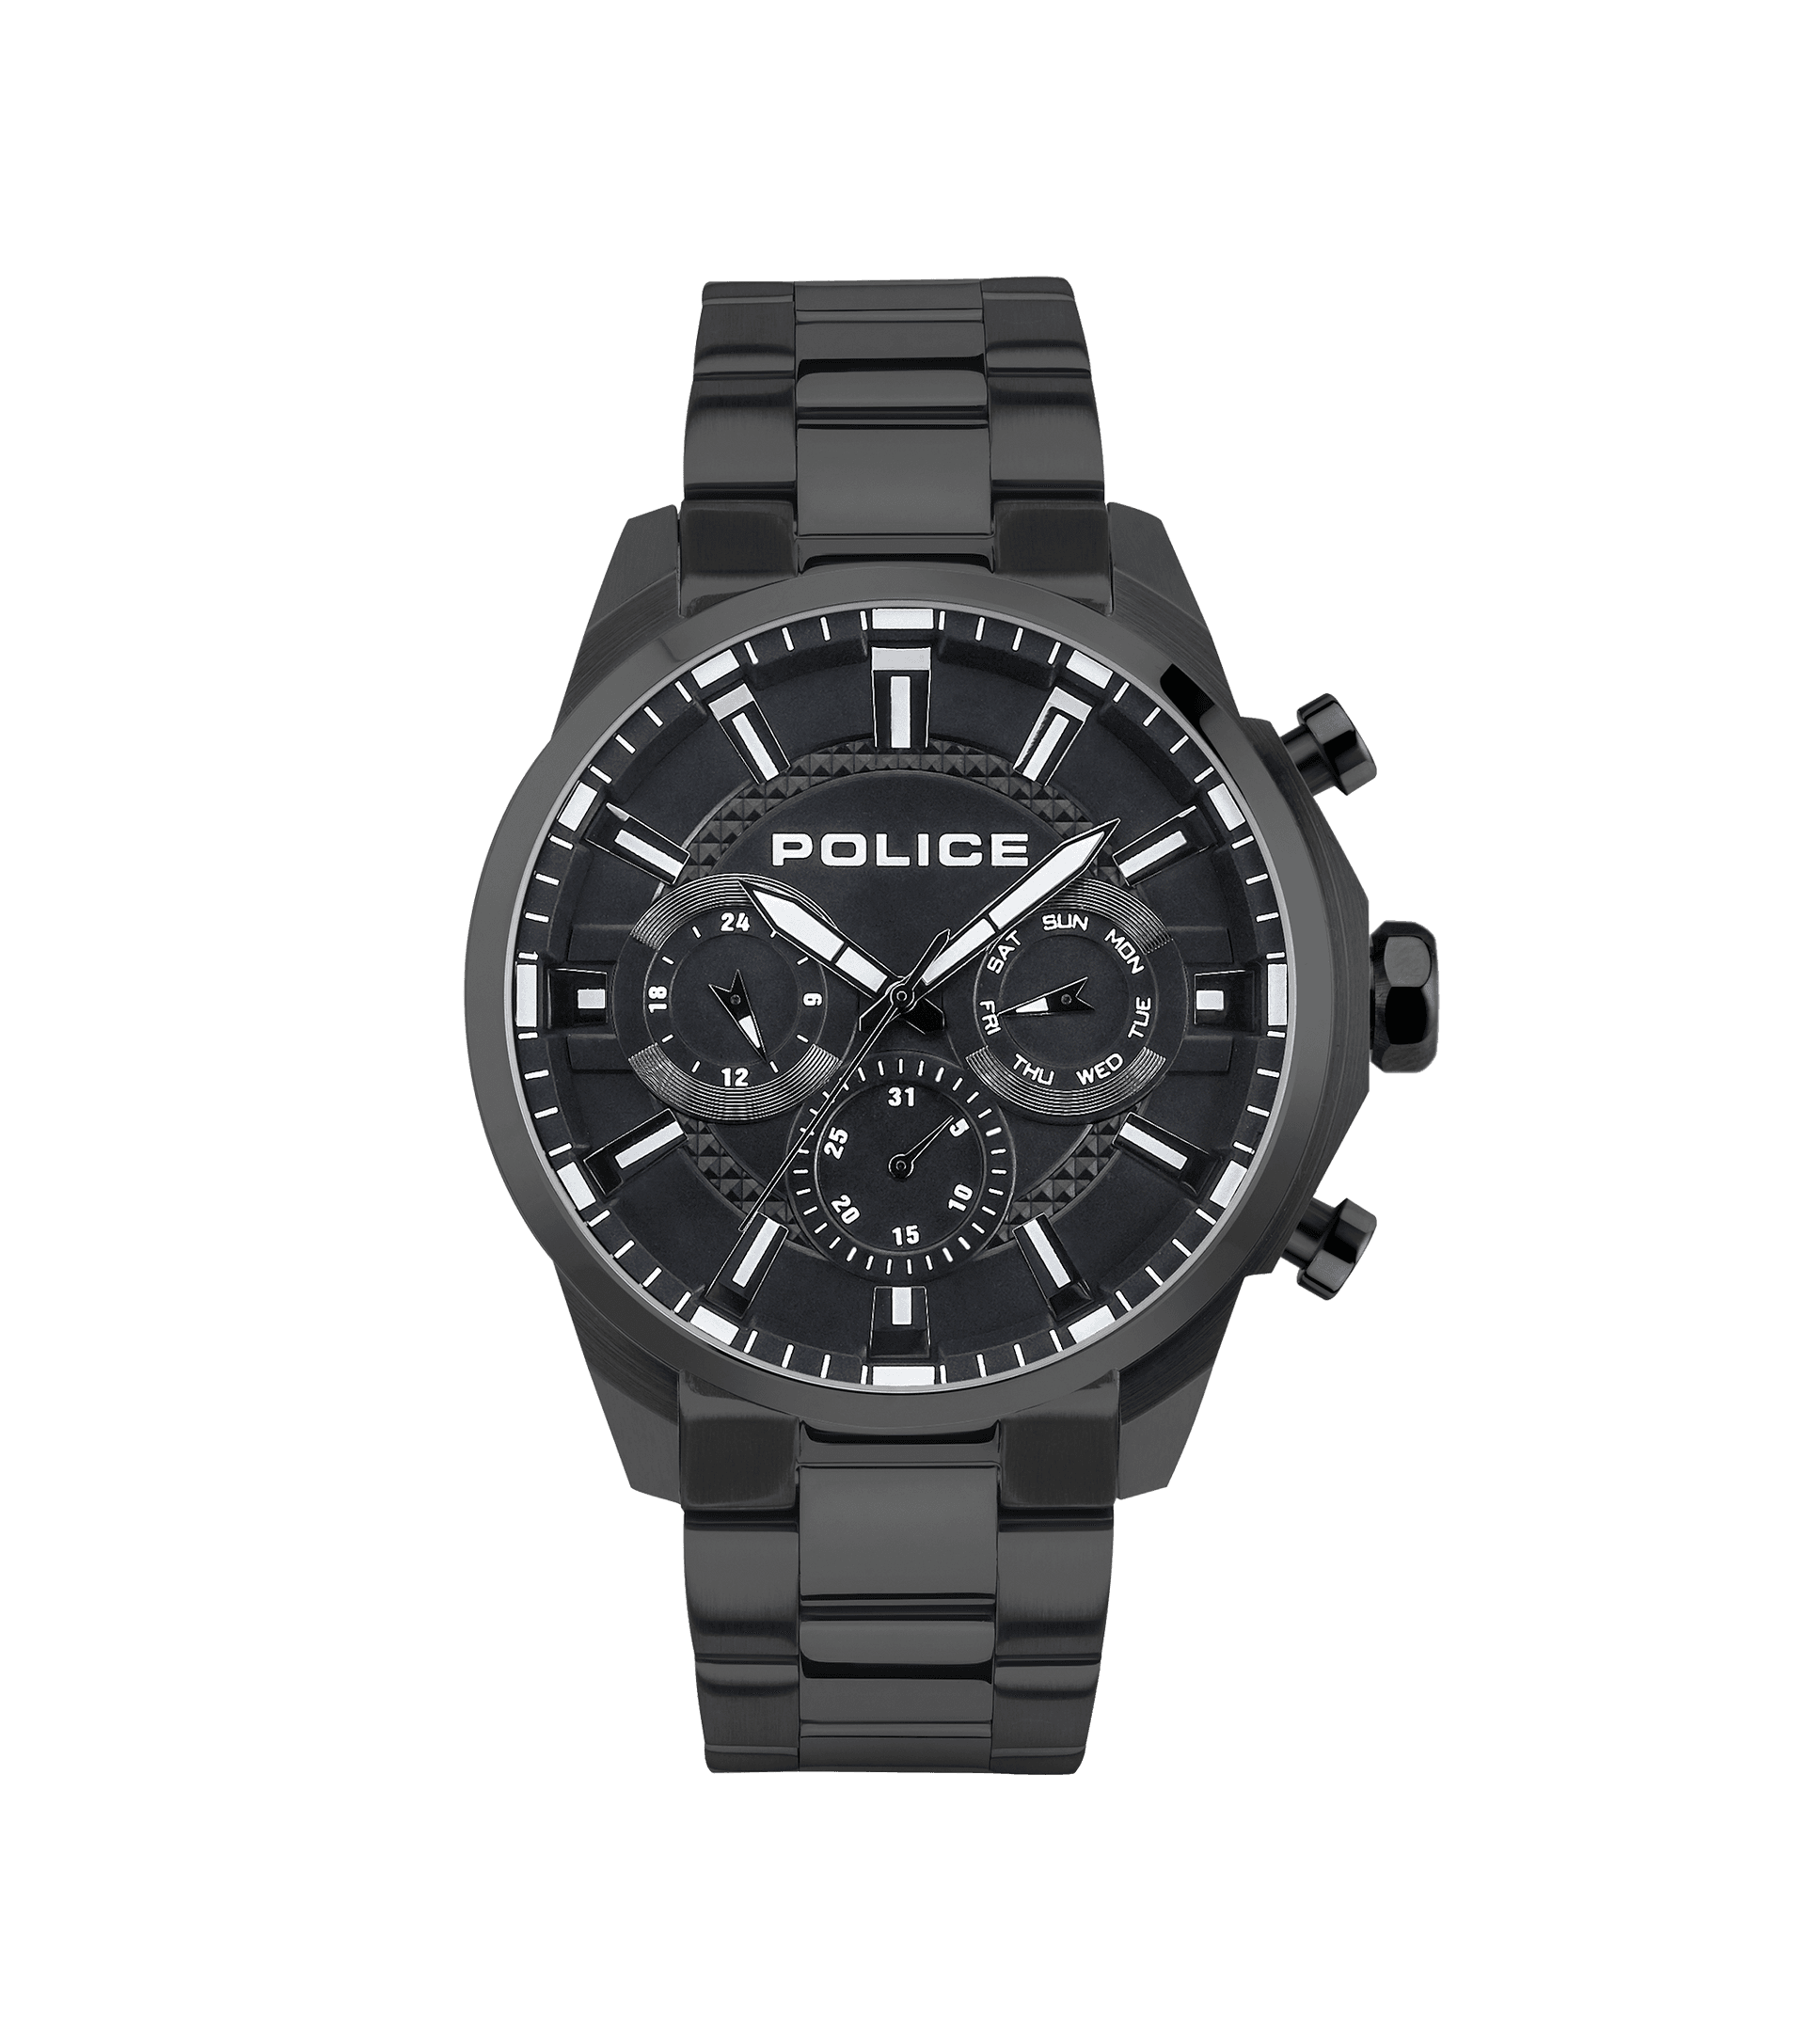 Police watches - Underlined Watch Black, Black For Police Men